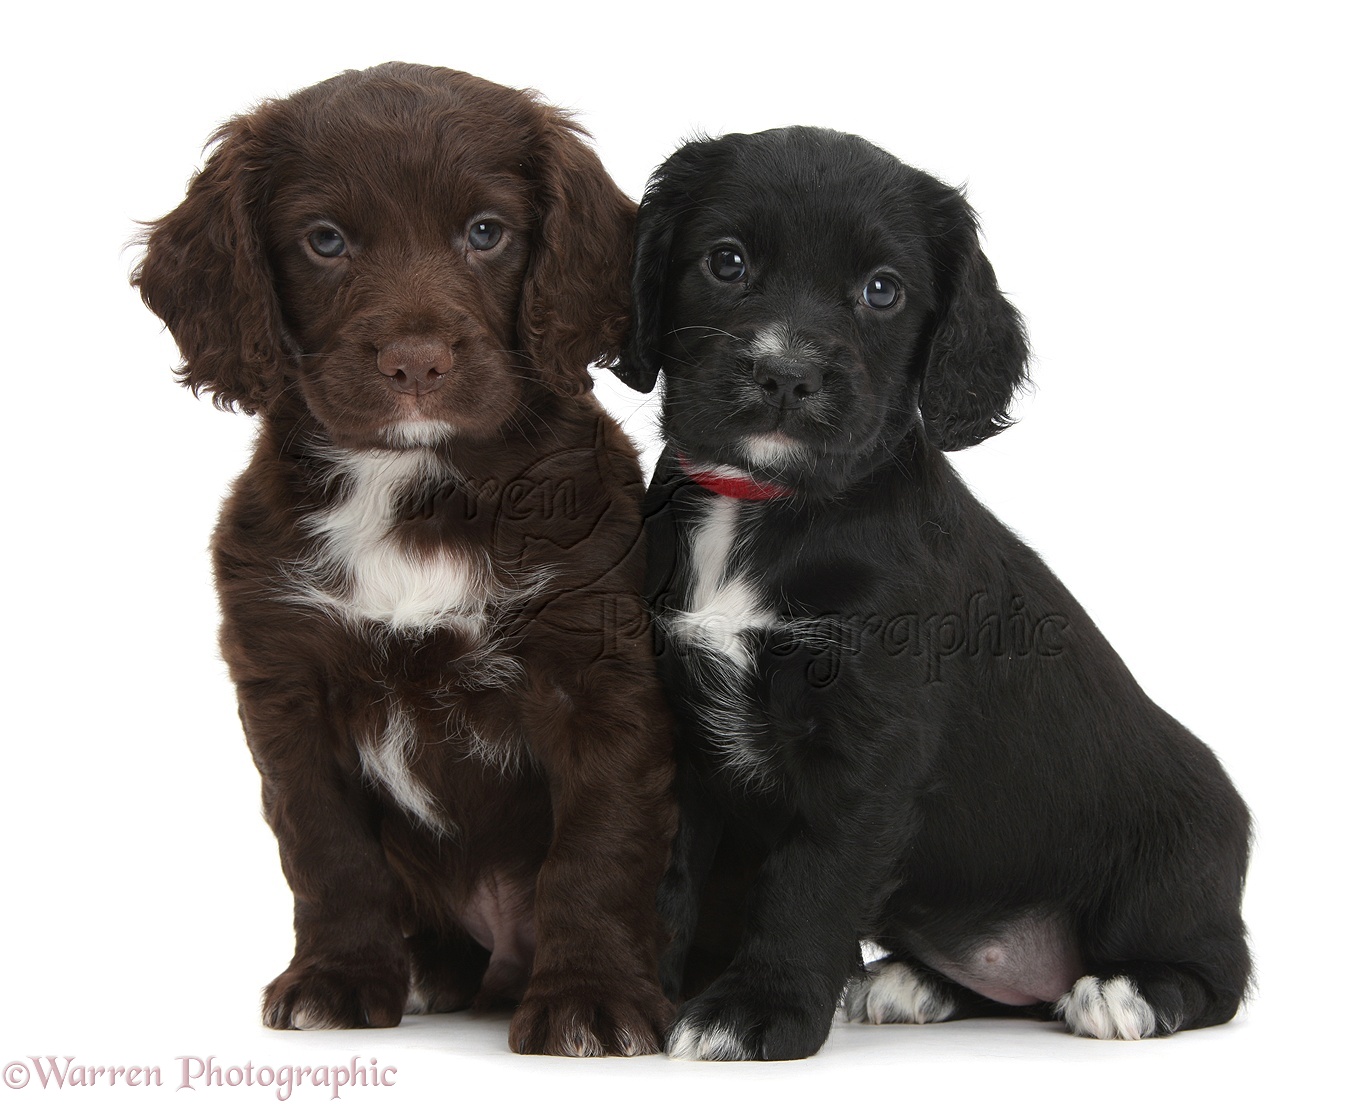 Dogs: Black and chocolate Cocker Spaniel puppies photo WP39370